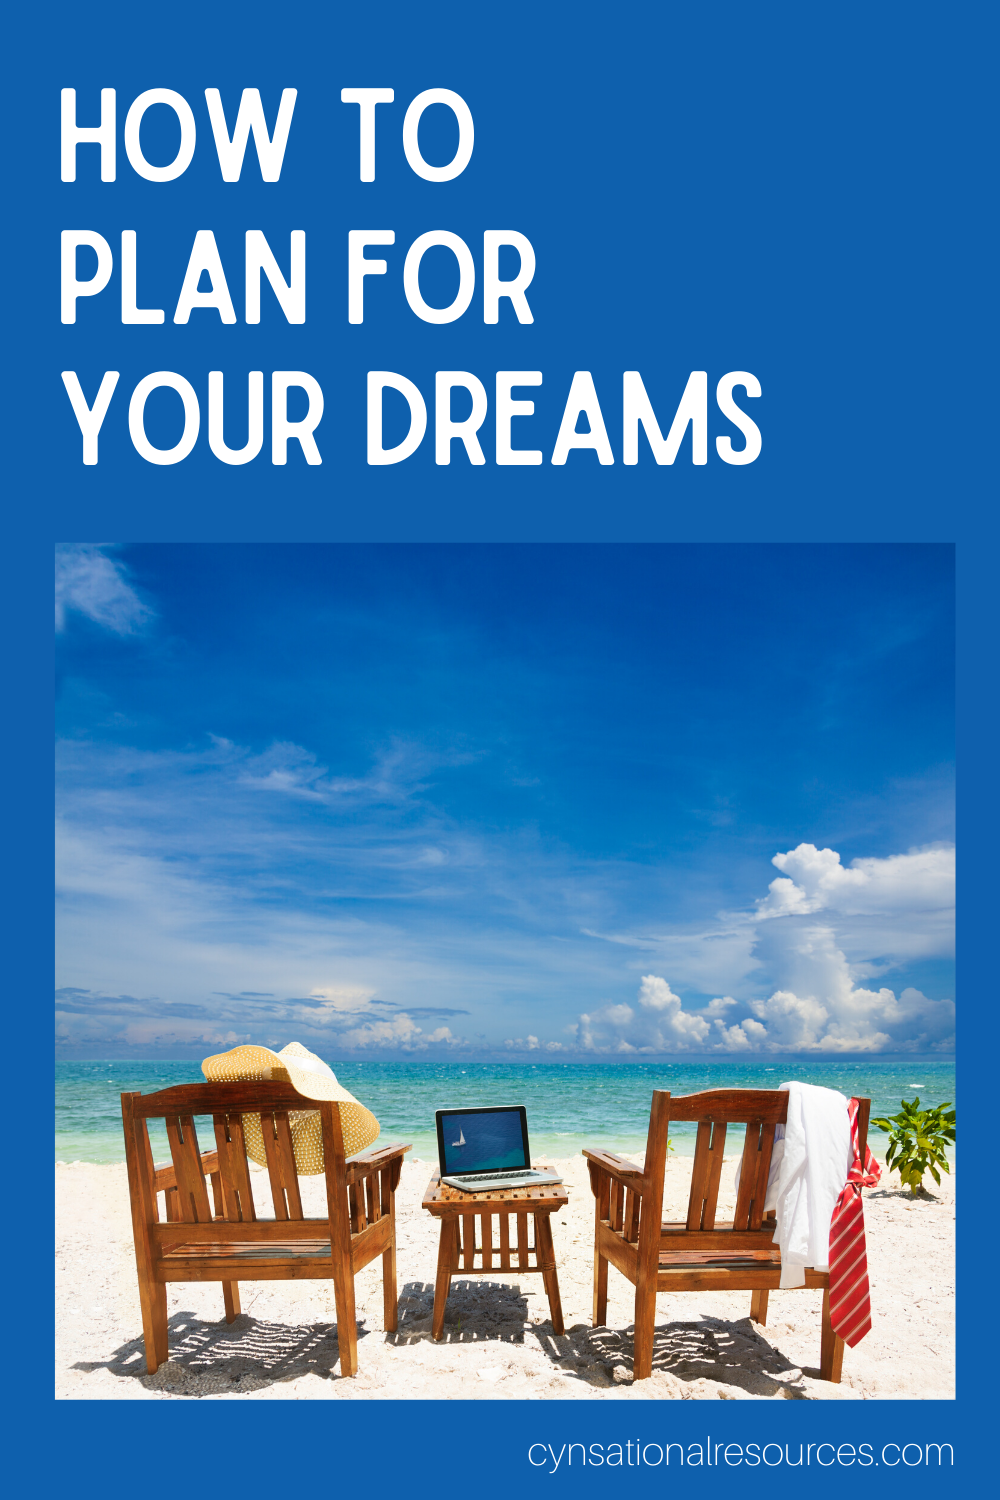 How to turn a Dream Into a Plan